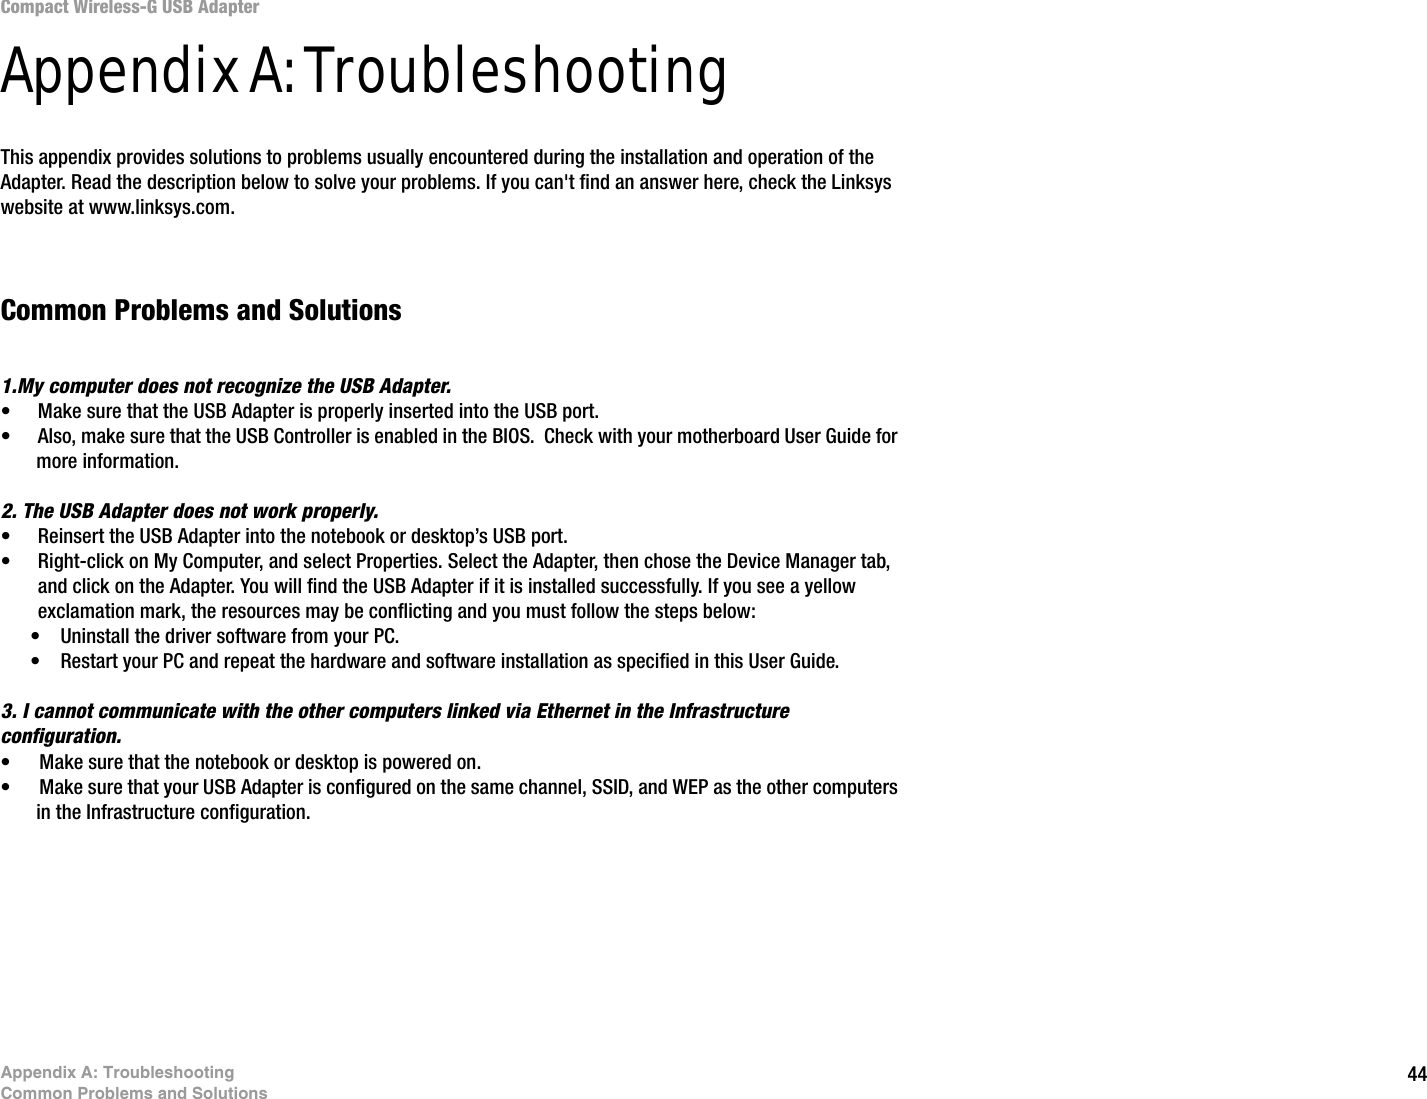 44Appendix A: TroubleshootingCommon Problems and SolutionsCompact Wireless-G USB AdapterAppendix A: TroubleshootingThis appendix provides solutions to problems usually encountered during the installation and operation of the Adapter. Read the description below to solve your problems. If you can&apos;t find an answer here, check the Linksys website at www.linksys.com.Common Problems and Solutions1.My computer does not recognize the USB Adapter.• Make sure that the USB Adapter is properly inserted into the USB port.• Also, make sure that the USB Controller is enabled in the BIOS.  Check with your motherboard User Guide for more information.2. The USB Adapter does not work properly.• Reinsert the USB Adapter into the notebook or desktop’s USB port. • Right-click on My Computer, and select Properties. Select the Adapter, then chose the Device Manager tab, and click on the Adapter. You will find the USB Adapter if it is installed successfully. If you see a yellow exclamation mark, the resources may be conflicting and you must follow the steps below:• Uninstall the driver software from your PC.• Restart your PC and repeat the hardware and software installation as specified in this User Guide.3. I cannot communicate with the other computers linked via Ethernet in the Infrastructure configuration.• Make sure that the notebook or desktop is powered on.• Make sure that your USB Adapter is configured on the same channel, SSID, and WEP as the other computers in the Infrastructure configuration. 